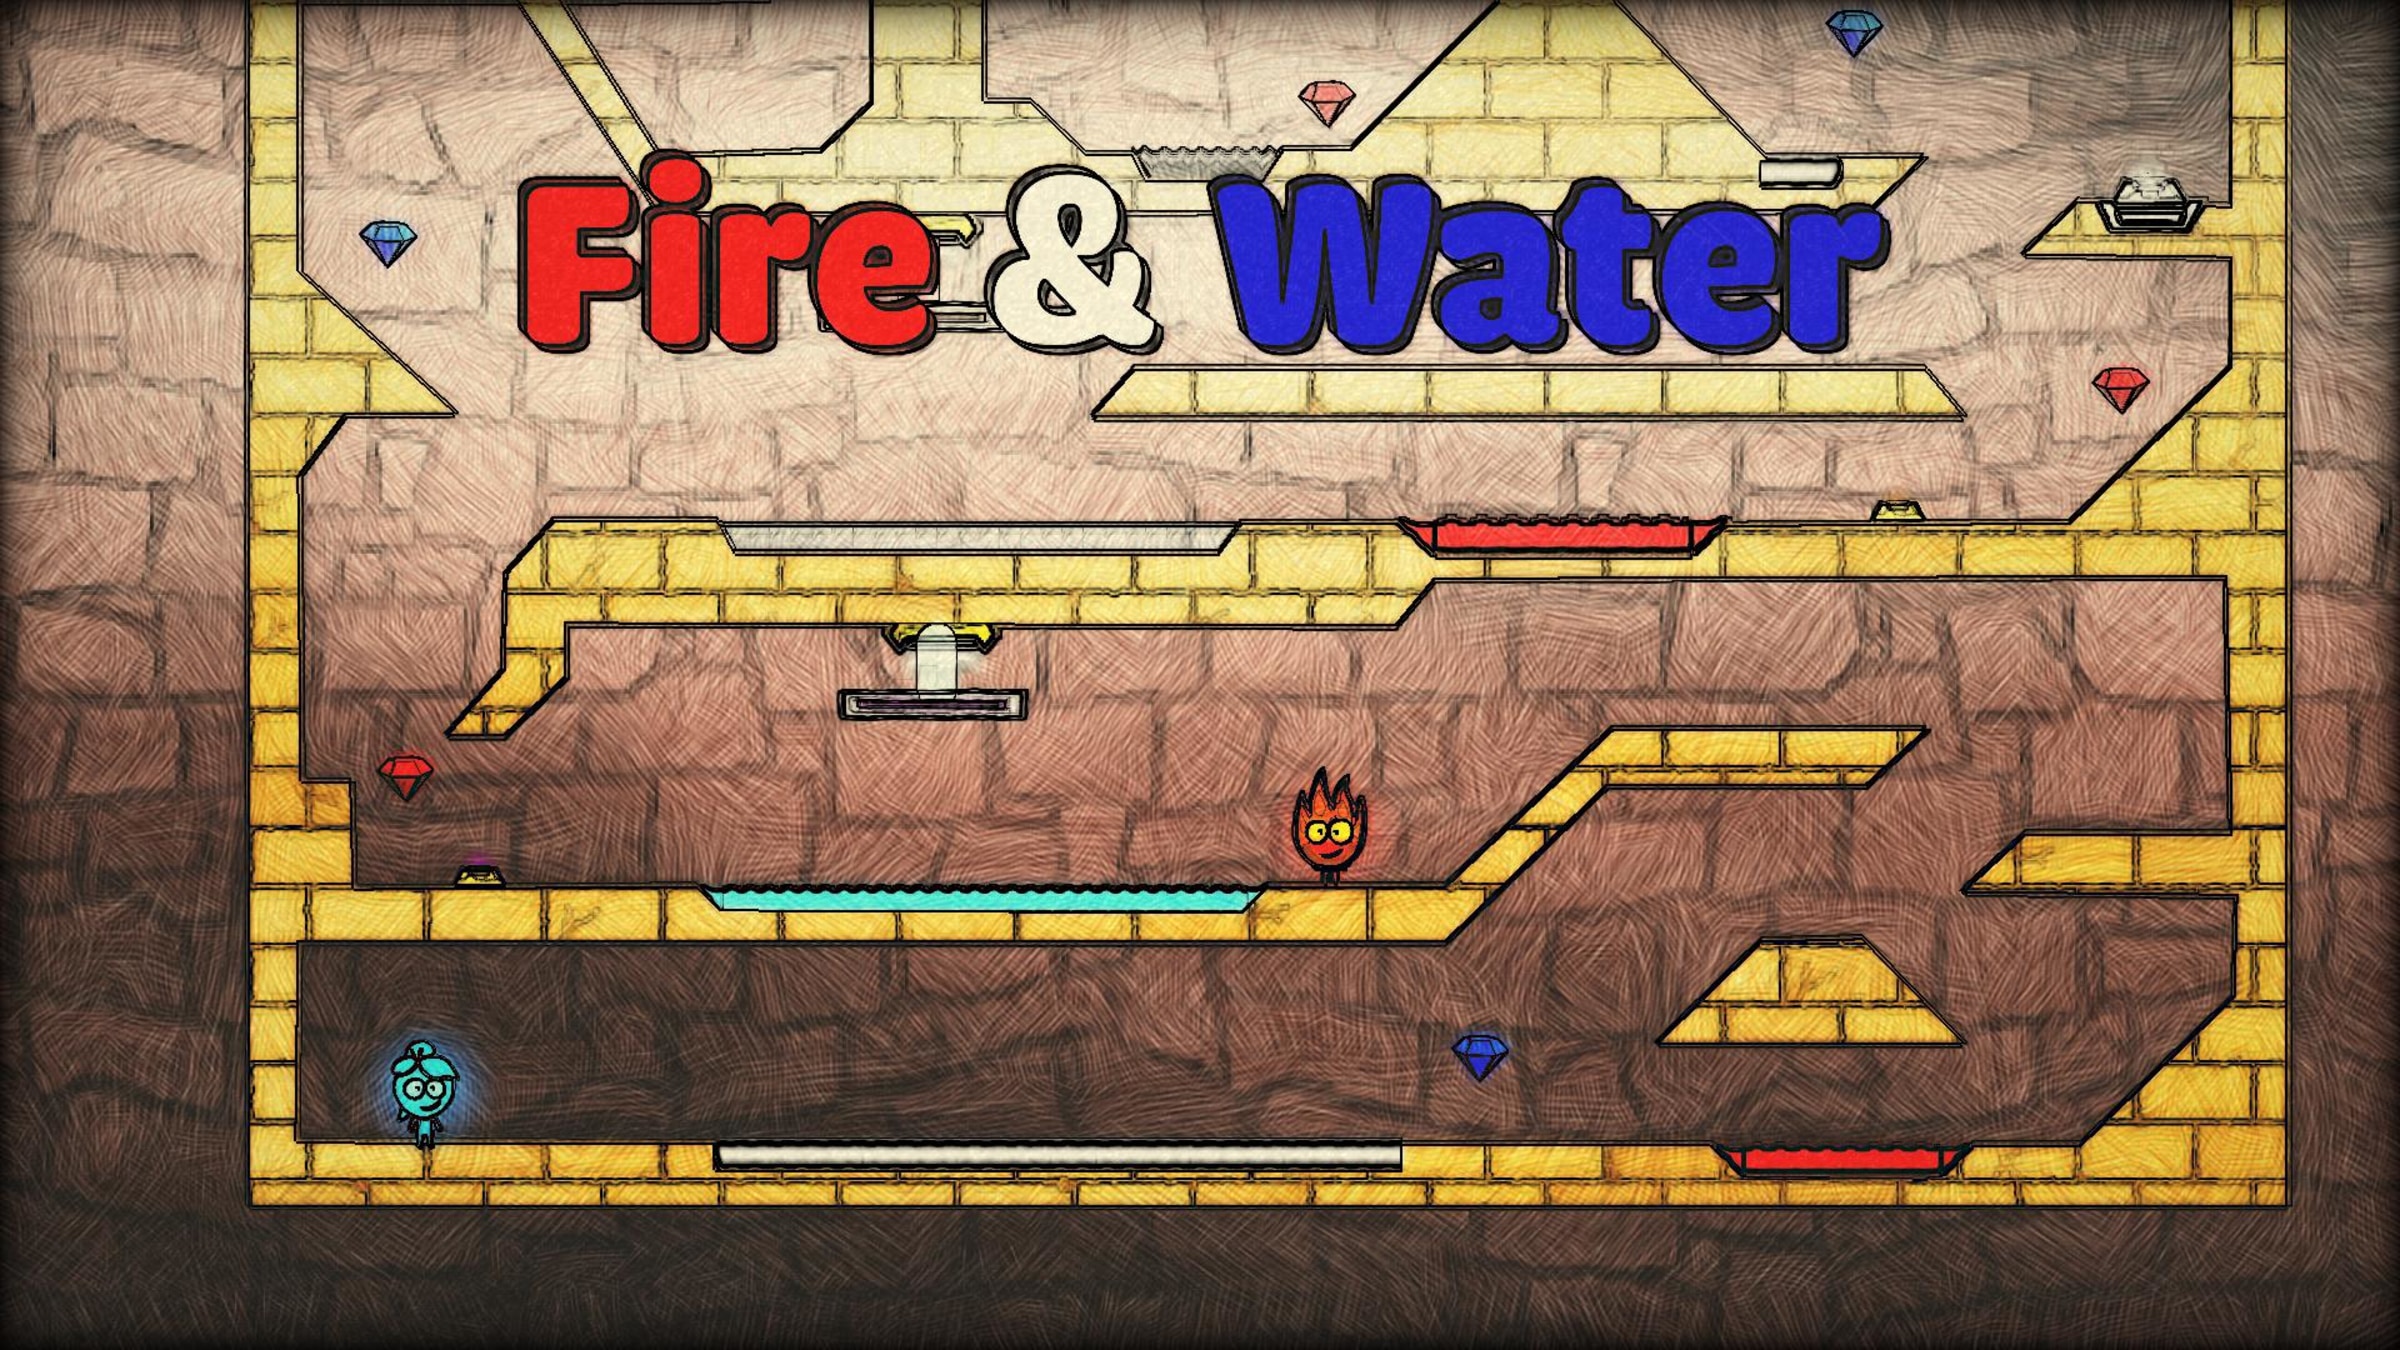 FireBoy & WaterGirl - Educational Game Review